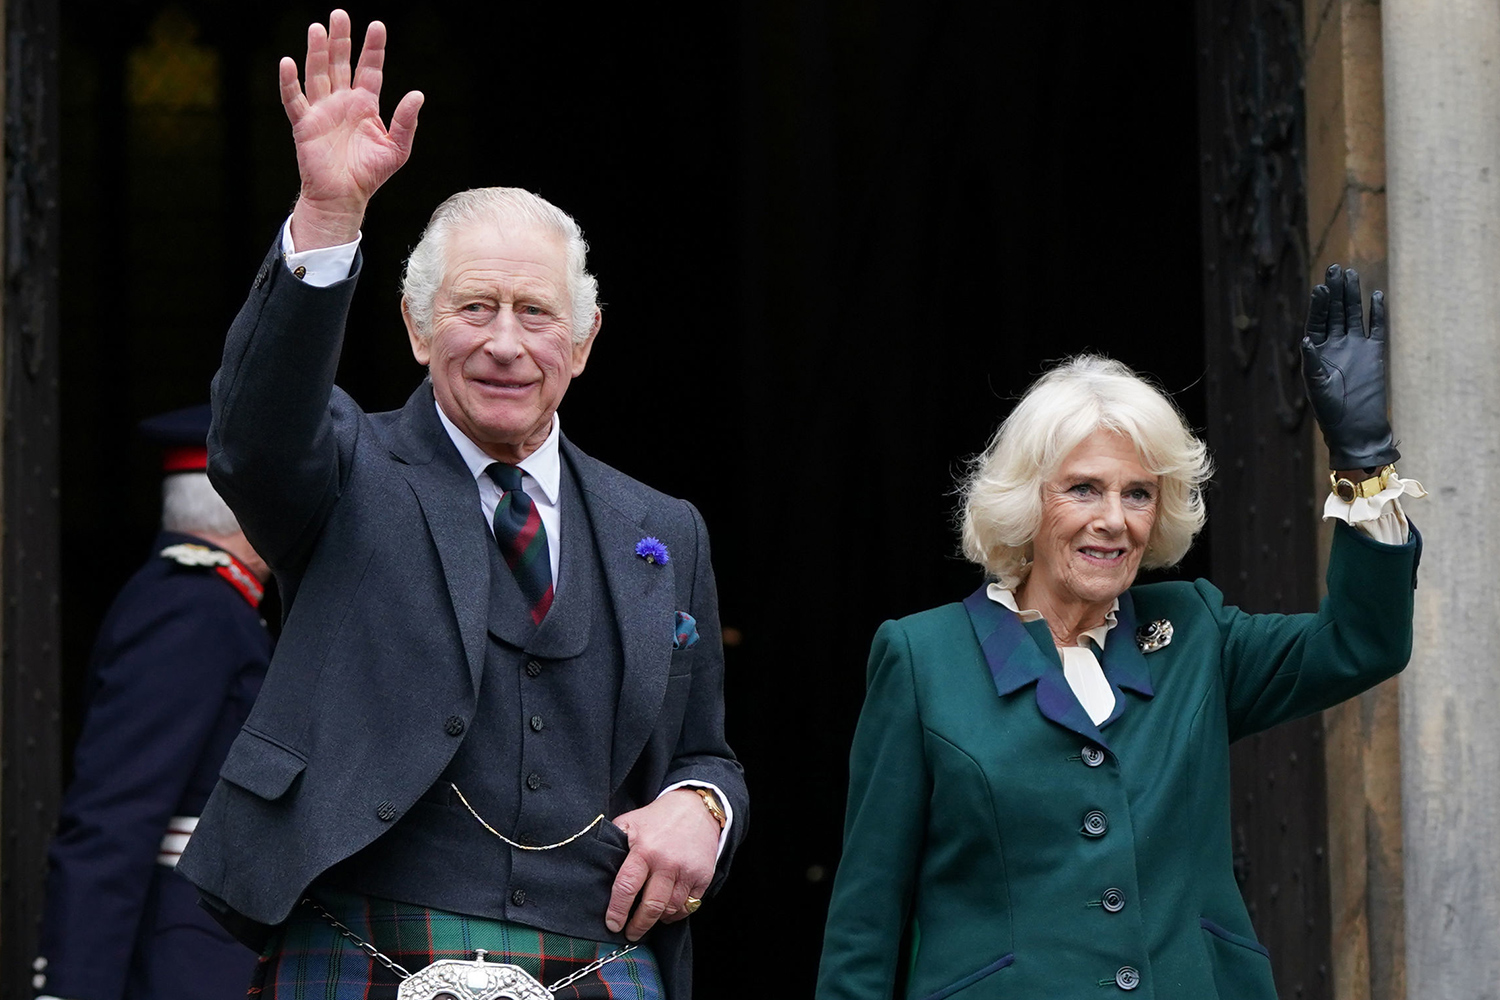 King Charles III and Camilla, Queen Consort, waves as they leave Dunfermline Abbey, after a visit to mark its 950th anniversary, and after attending a meeting at the City Chambers in Dunfermline where the King formally marked the conferral of city status on the former town on October 3, 2022 in Dunfermline, Scotland.